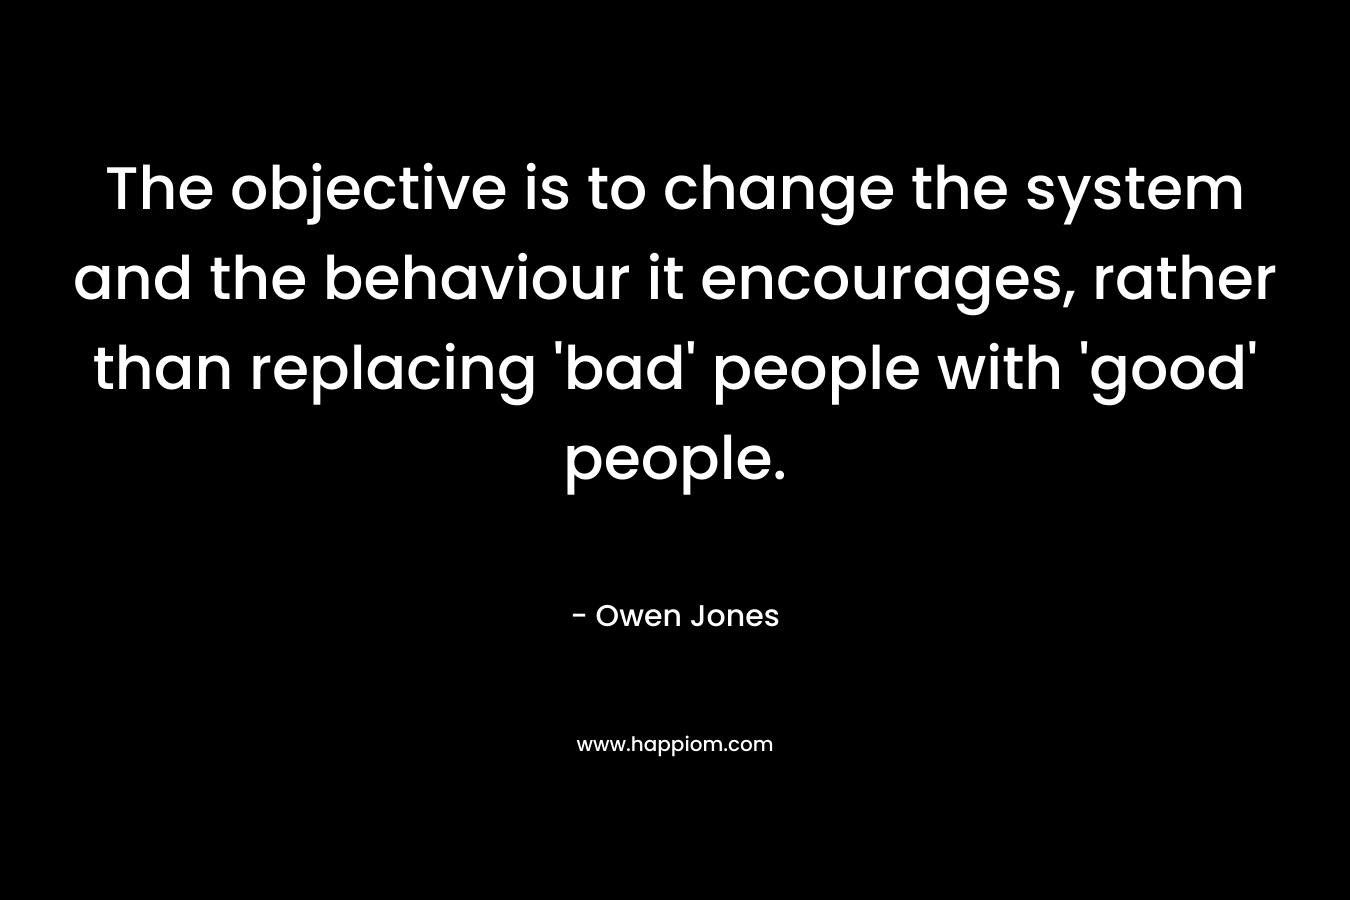 The objective is to change the system and the behaviour it encourages, rather than replacing 'bad' people with 'good' people.